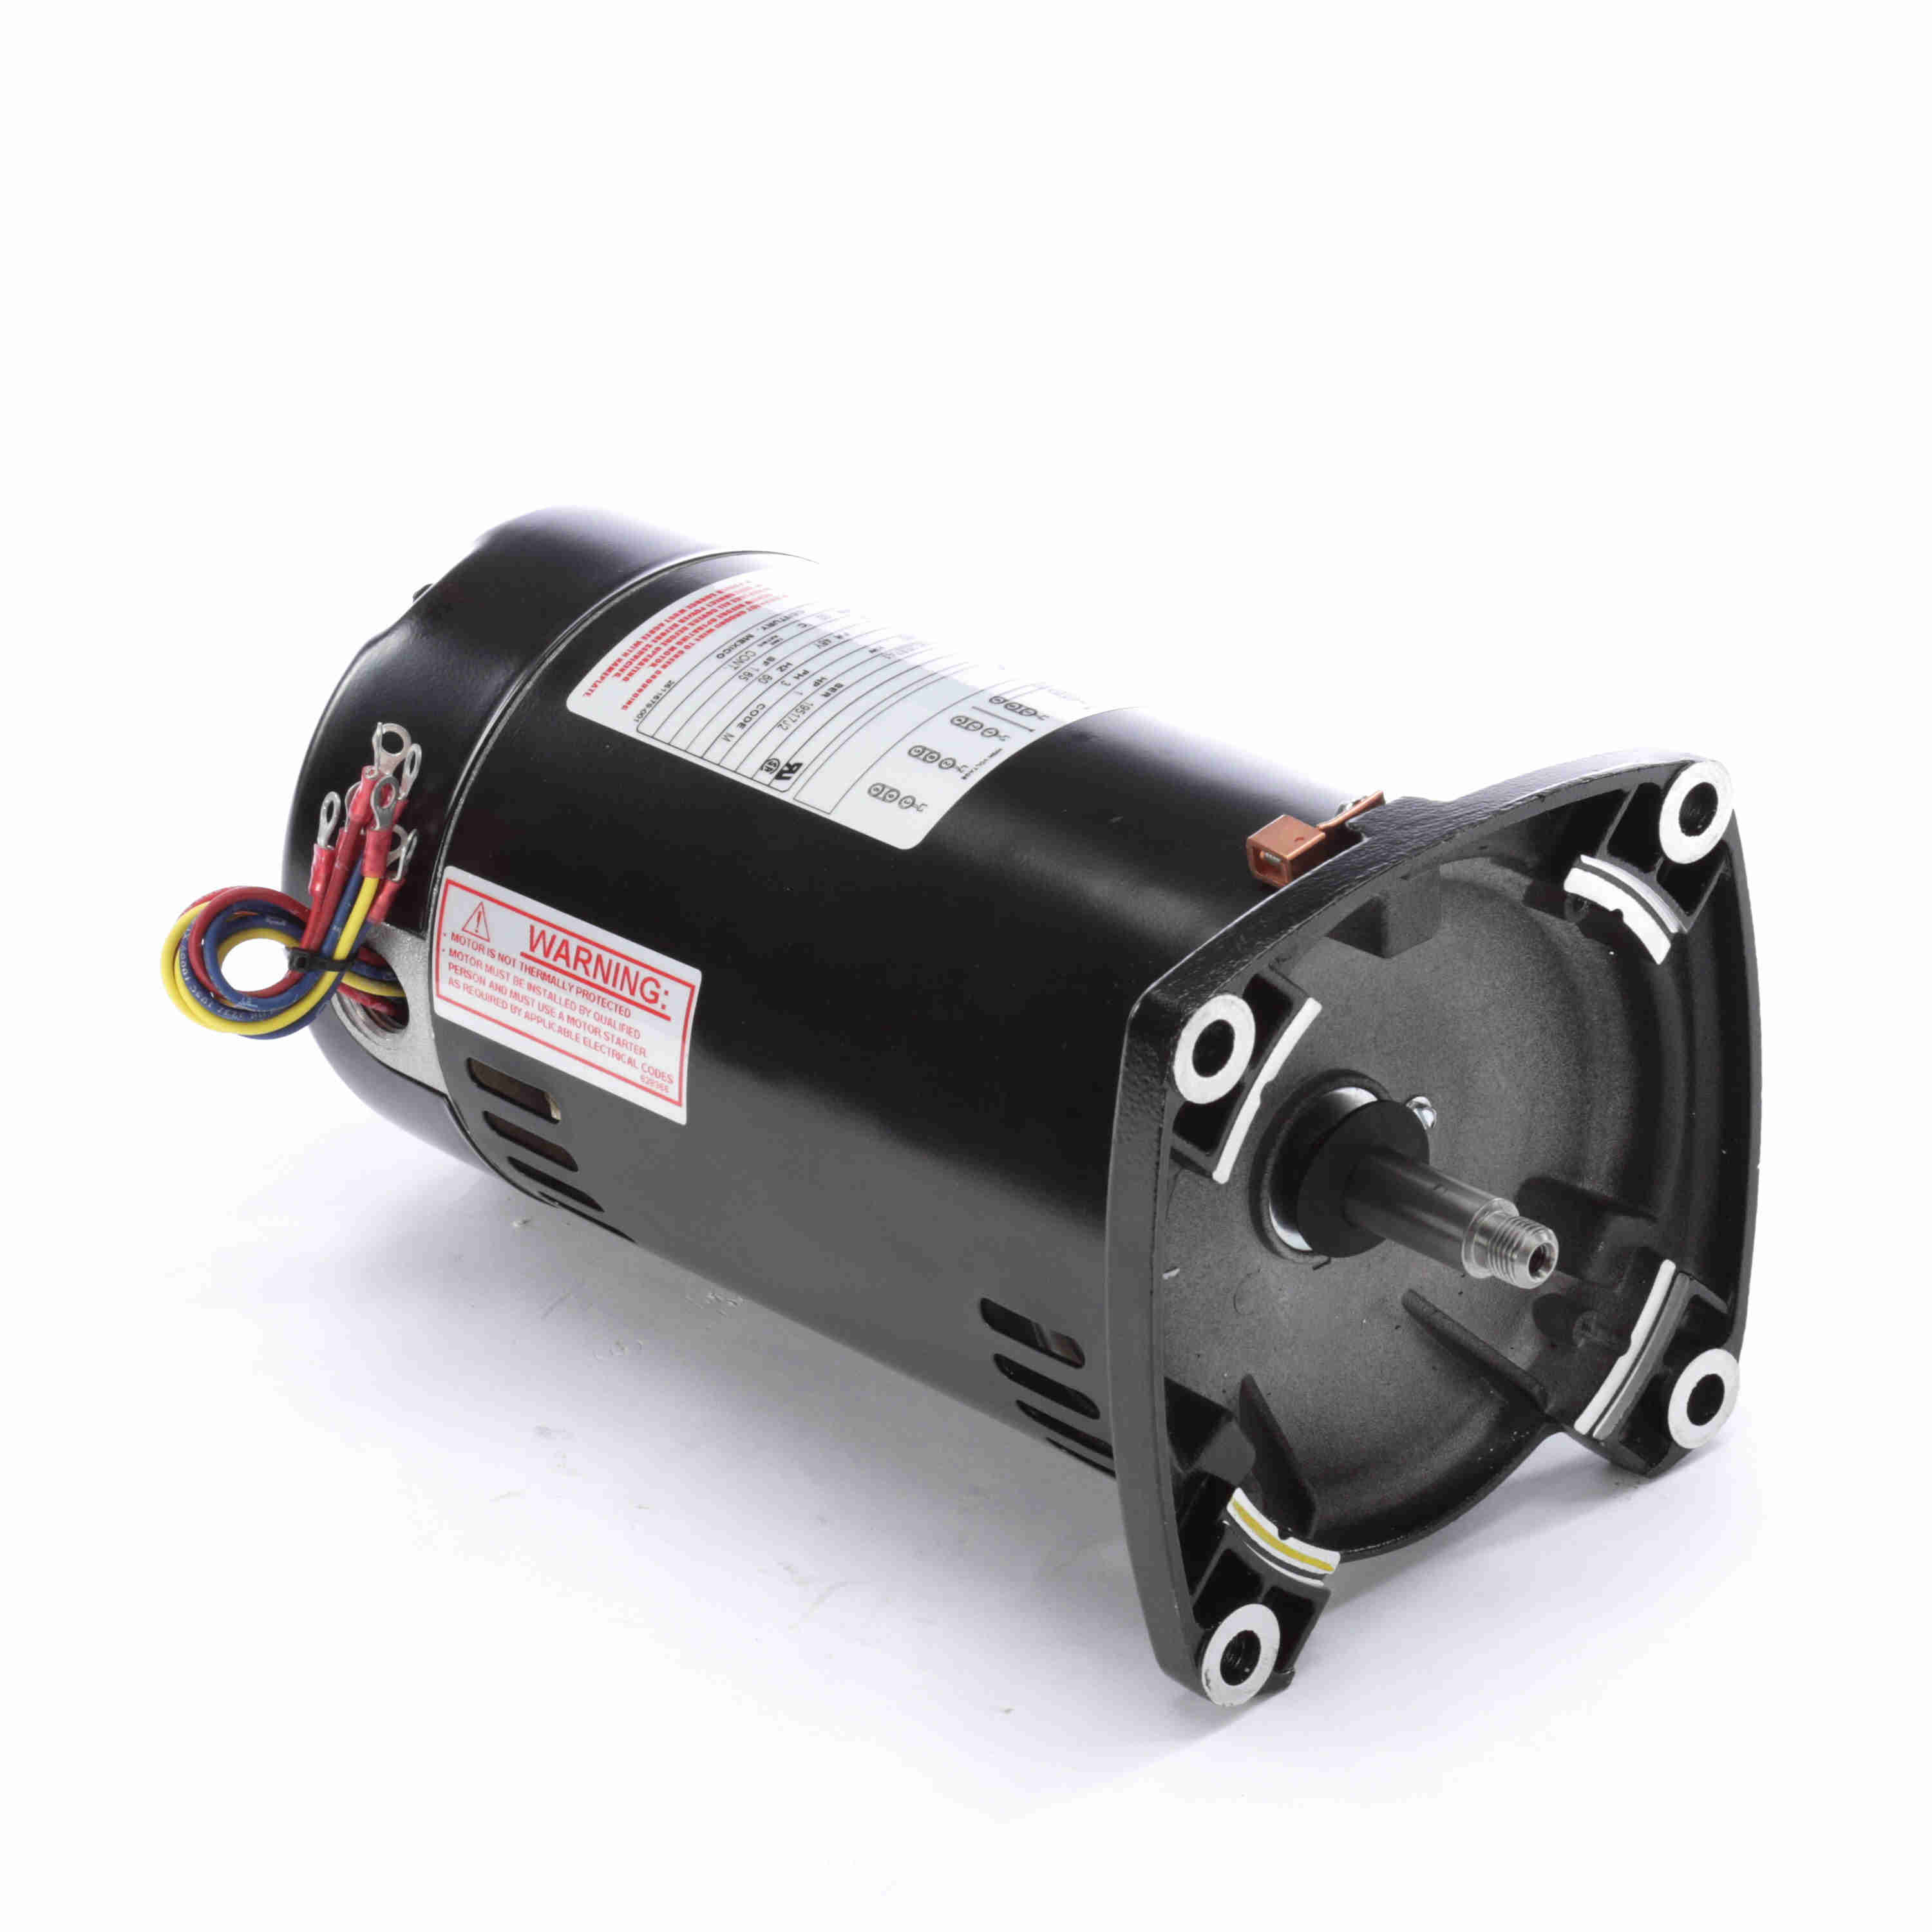 Century Square Flange 3-Phase Full-Rated Pool and Spa Pump Motor; 1 HP, 3450 RPM, 208-230/460 V, 48Y, Threaded Shaft - Q3102